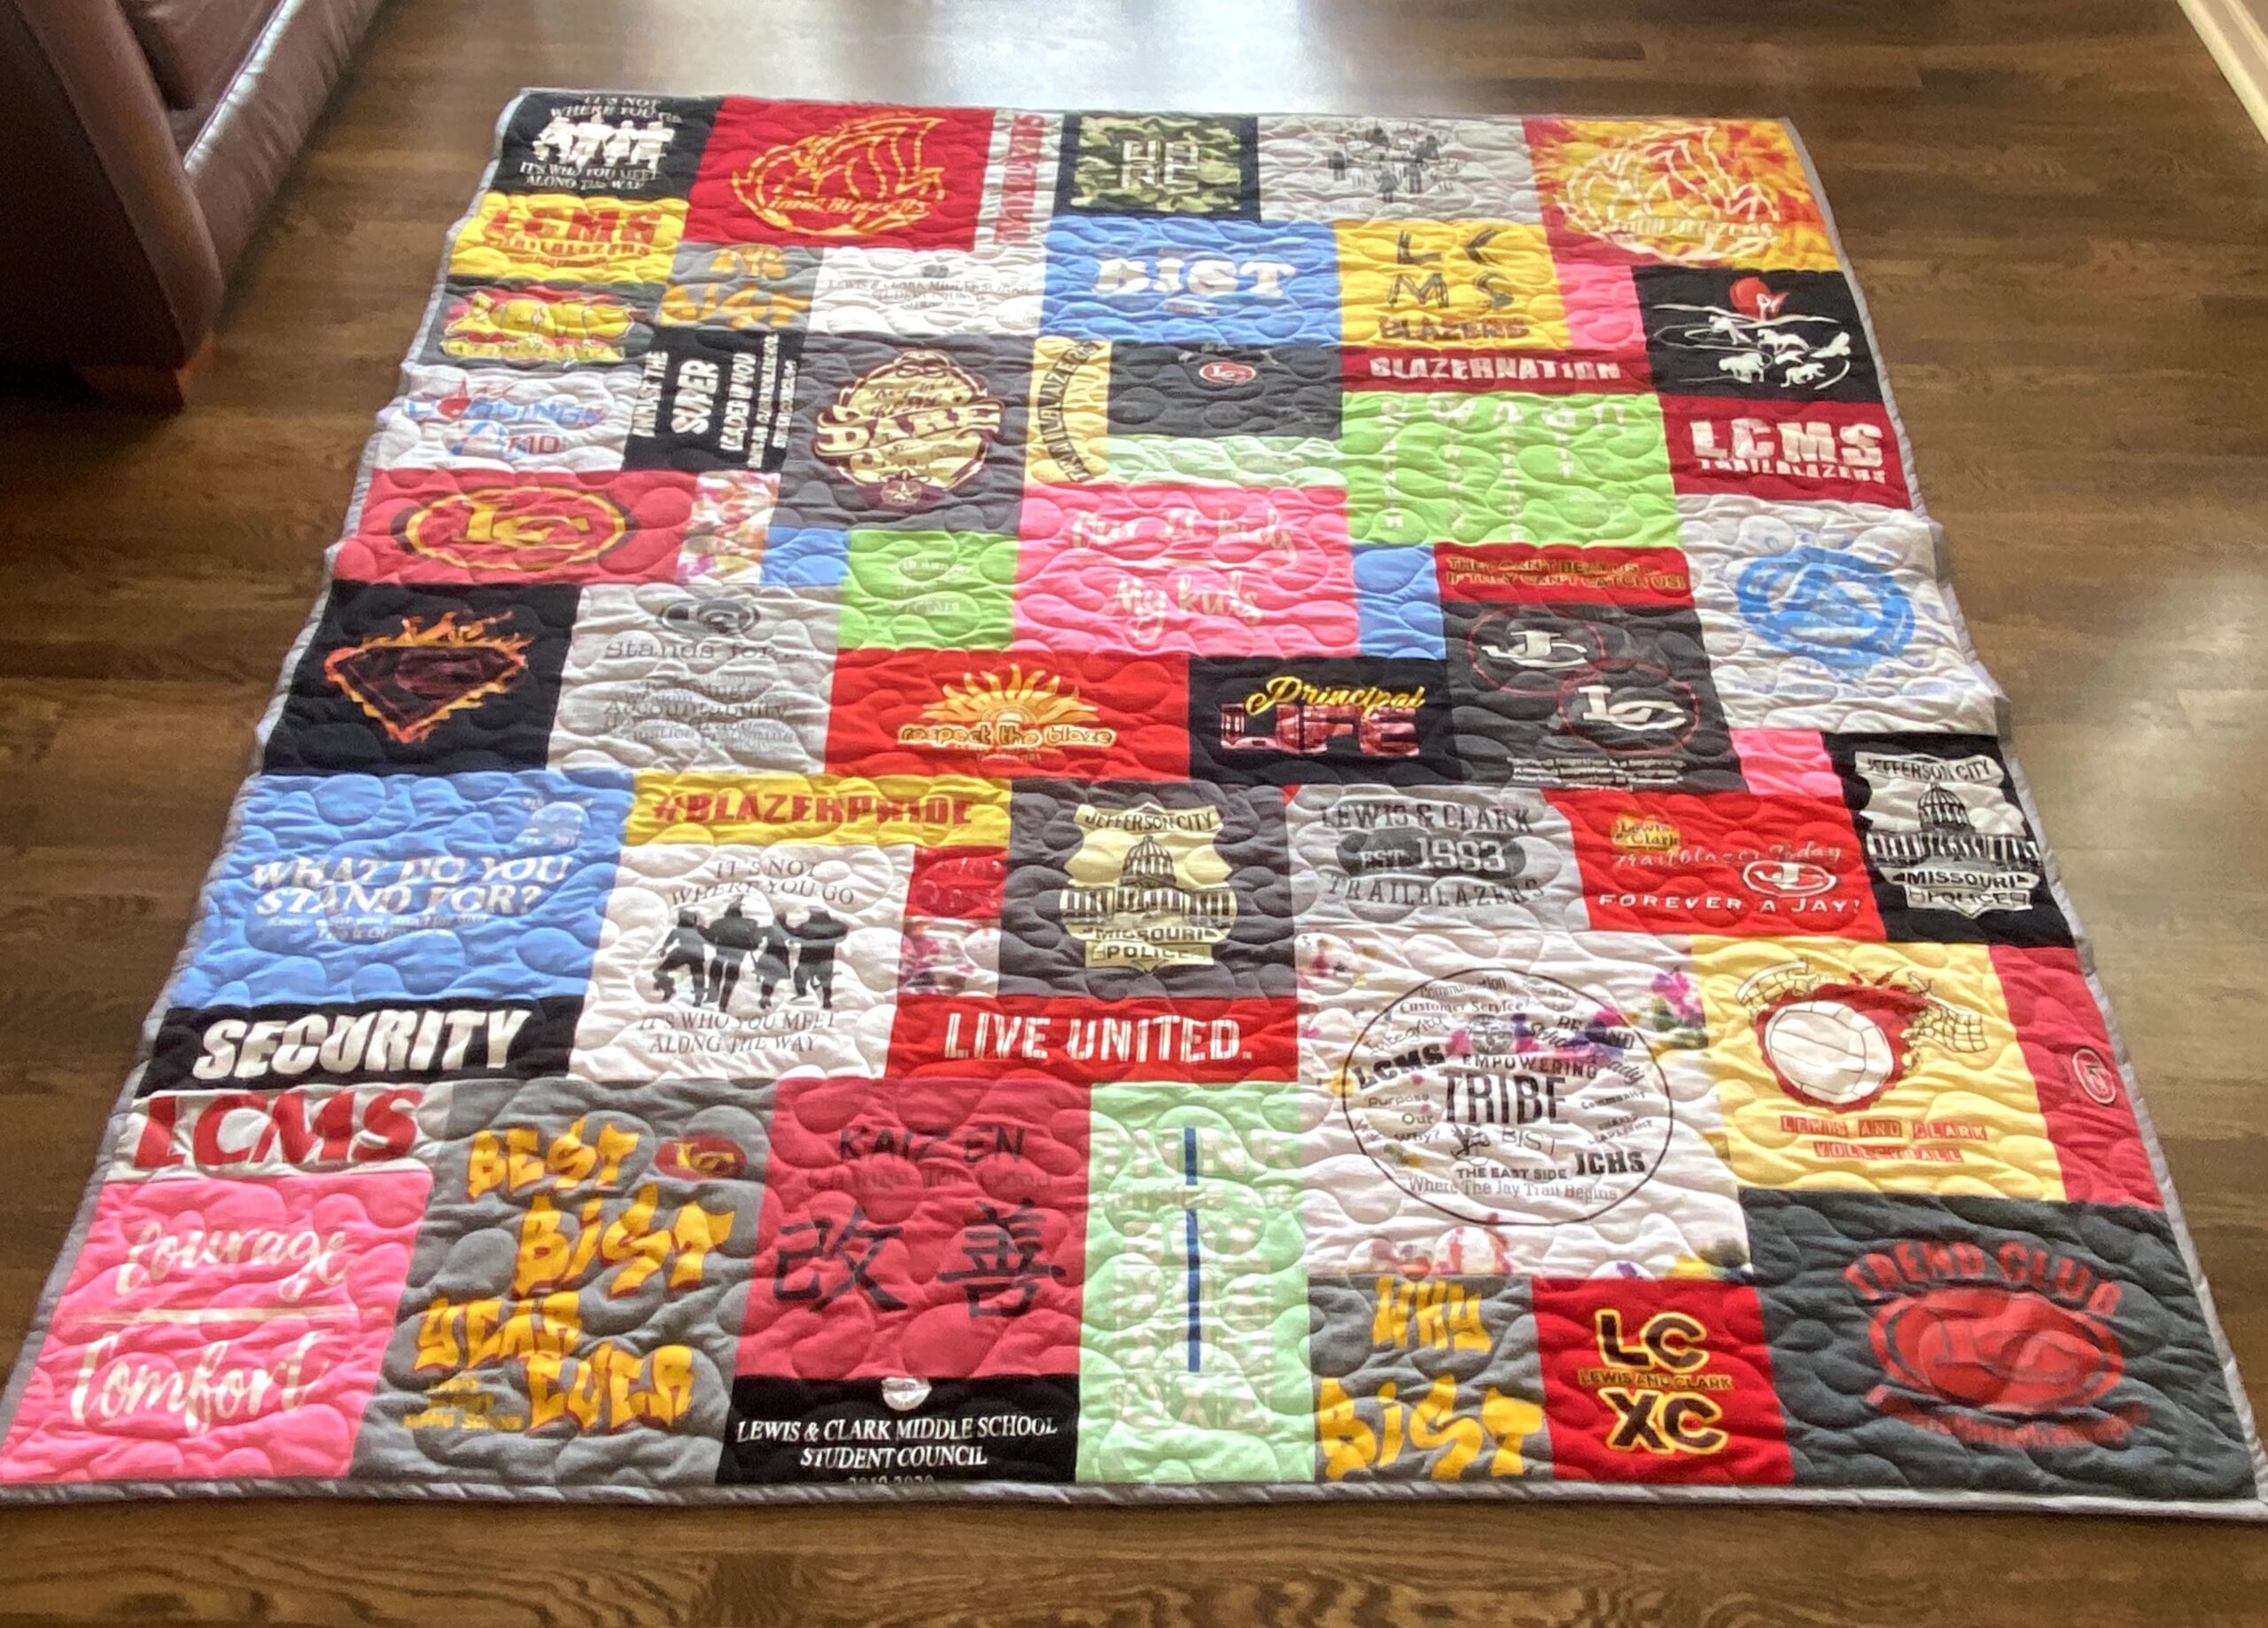 A quilt made out of t-shirts on top of a wooden floor.